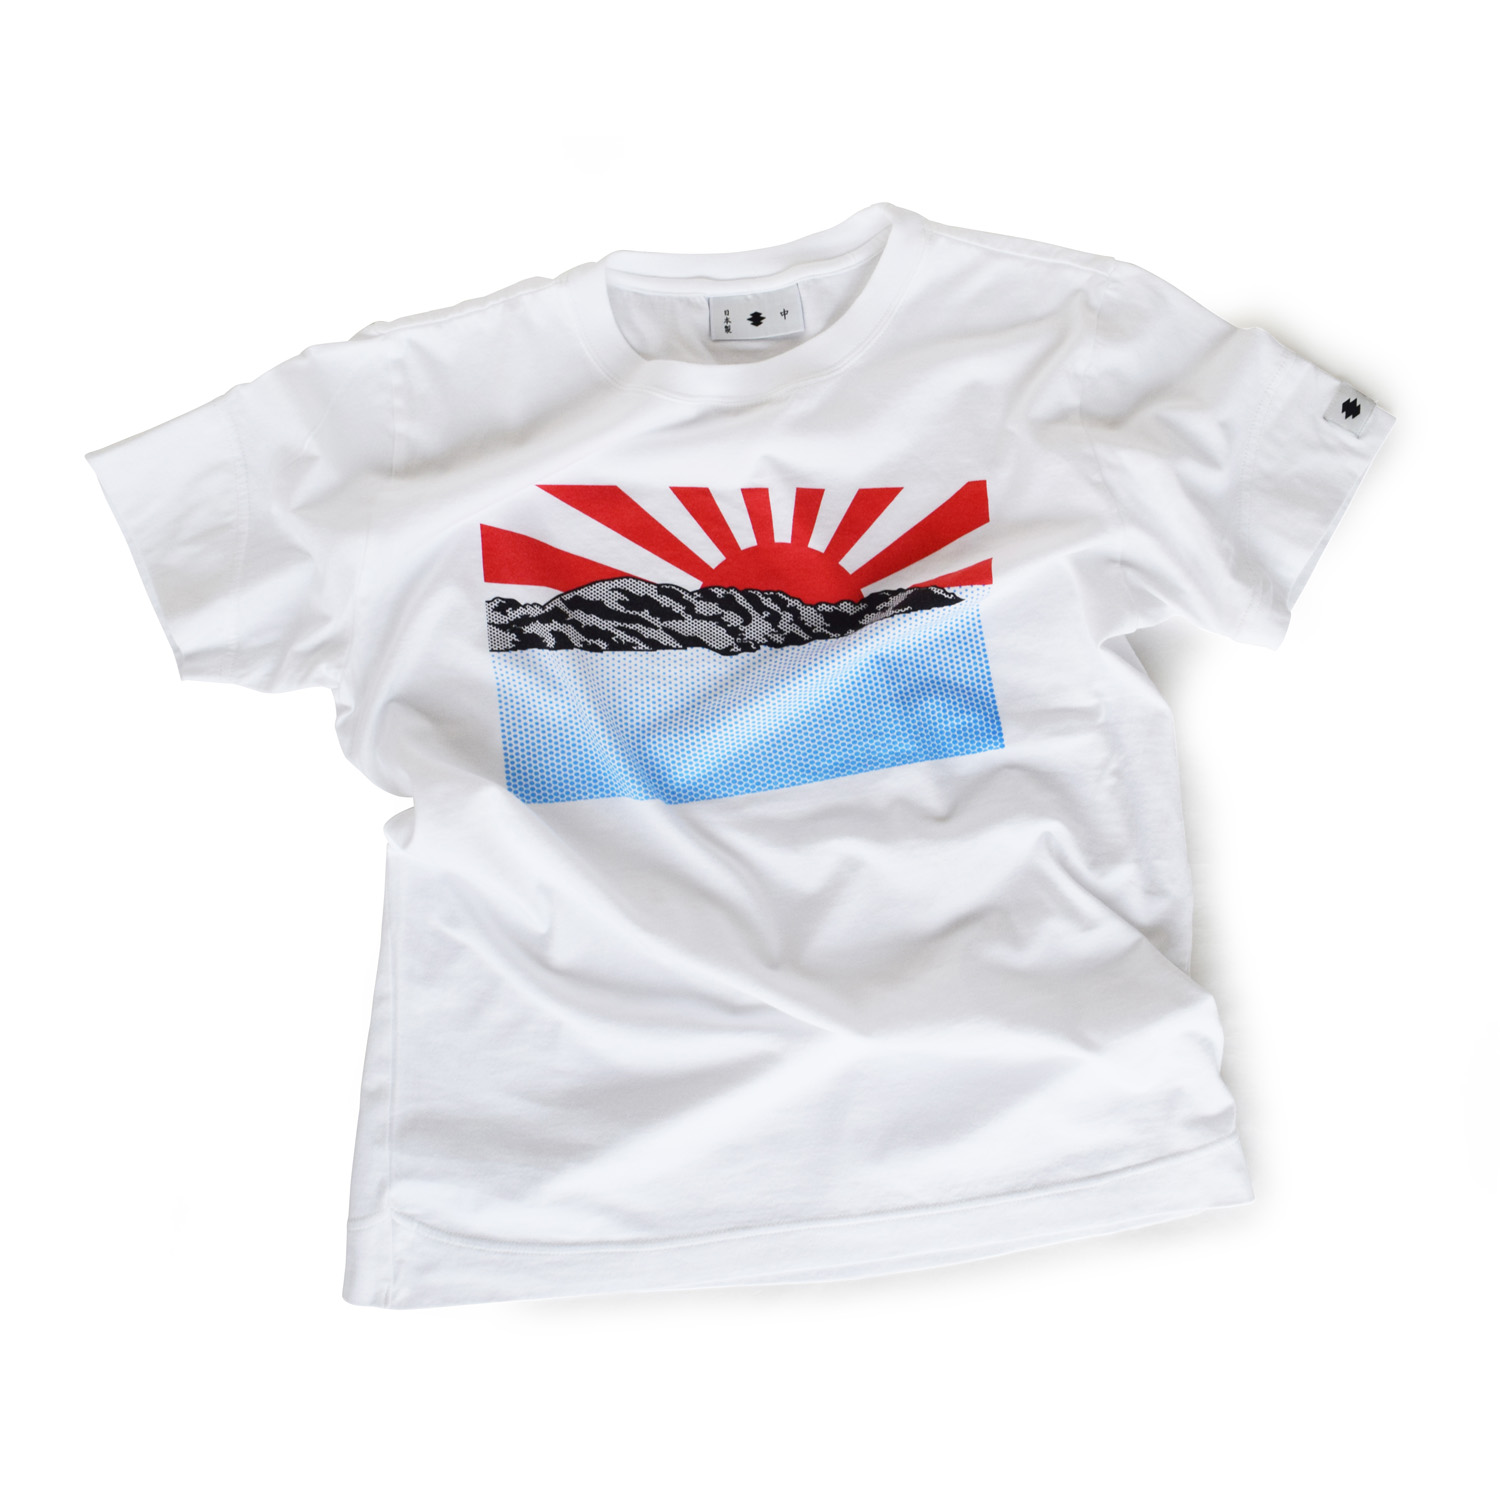 <div style="width:60px;display:inline-block;">model</div> T-shirt #100 "Rising Sun"<br><div style="width:60px;display:inline-block;">color</div> white<br><div style="width:60px;display:inline-block;">material</div> cotton<br><div style="width:60px;display:inline-block;">price</div> 9,000JPY(+tax)